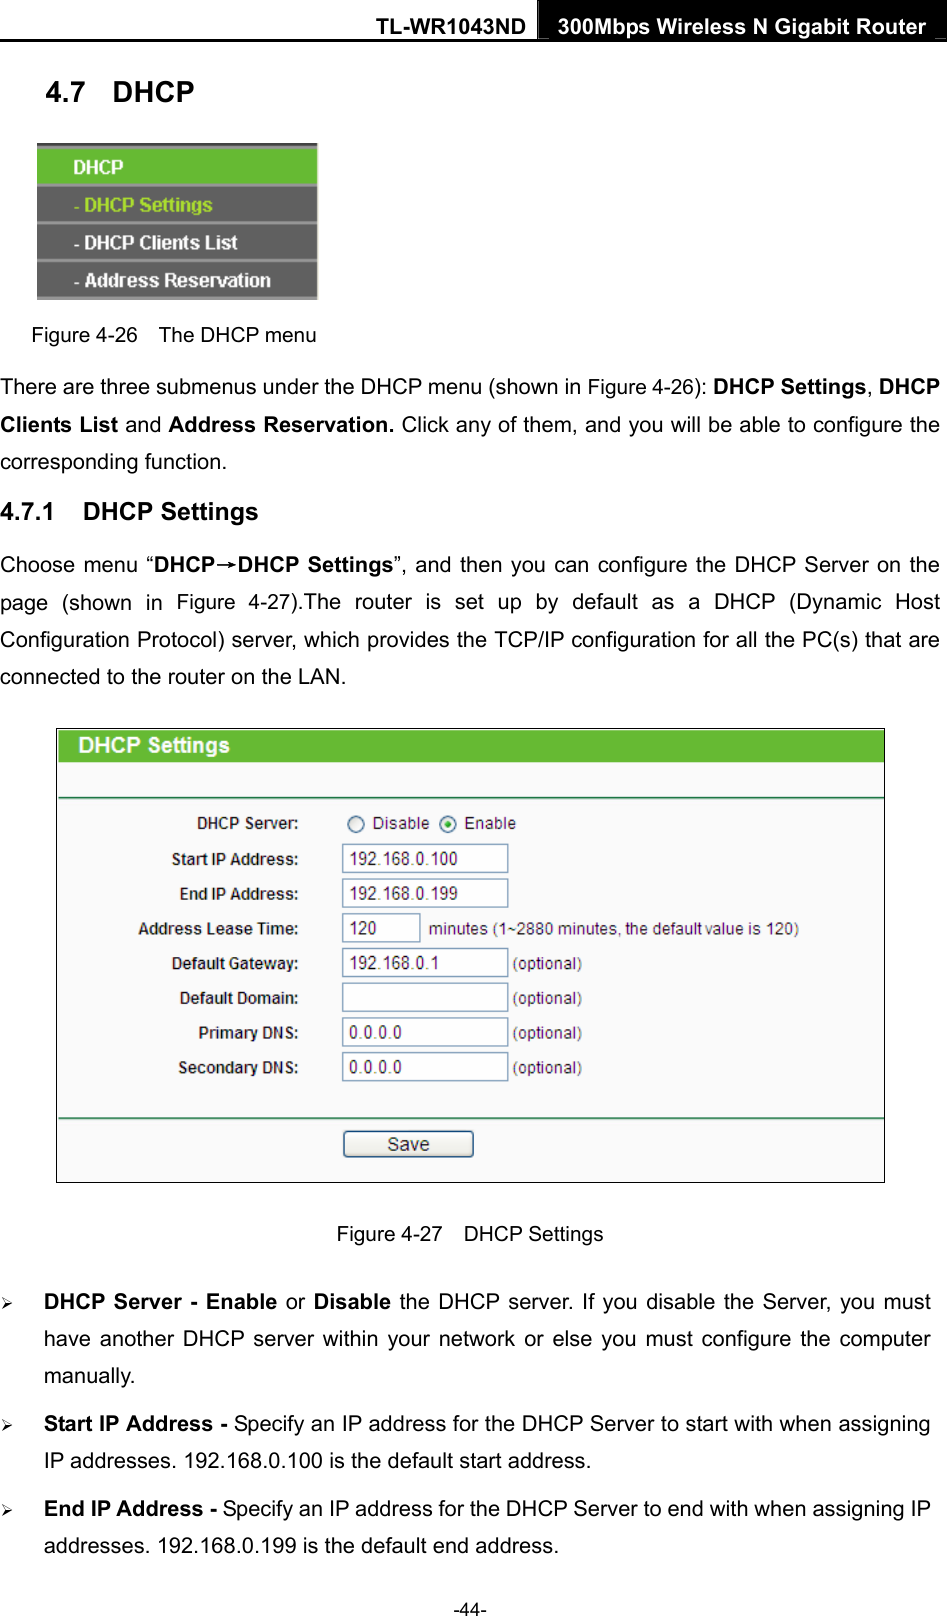 TL-WR1043ND 300Mbps Wireless N Gigabit Router  4.7  DHCP  Figure 4-26    The DHCP menu There are three submenus under the DHCP menu (shown in Figure 4-26): DHCP Settings, DHCP Clients List and Address Reservation. Click any of them, and you will be able to configure the corresponding function. 4.7.1  DHCP Settings Choose menu “DHCP→DHCP Settings”, and then you can configure the DHCP Server on the page (shown in Figure 4-27).The router is set up by default as a DHCP (Dynamic Host Configuration Protocol) server, which provides the TCP/IP configuration for all the PC(s) that are connected to the router on the LAN.    Figure 4-27  DHCP Settings ¾ DHCP Server - Enable or Disable the DHCP server. If you disable the Server, you must have another DHCP server within your network or else you must configure the computer manually. ¾ Start IP Address - Specify an IP address for the DHCP Server to start with when assigning IP addresses. 192.168.0.100 is the default start address. ¾ End IP Address - Specify an IP address for the DHCP Server to end with when assigning IP addresses. 192.168.0.199 is the default end address. -44- 